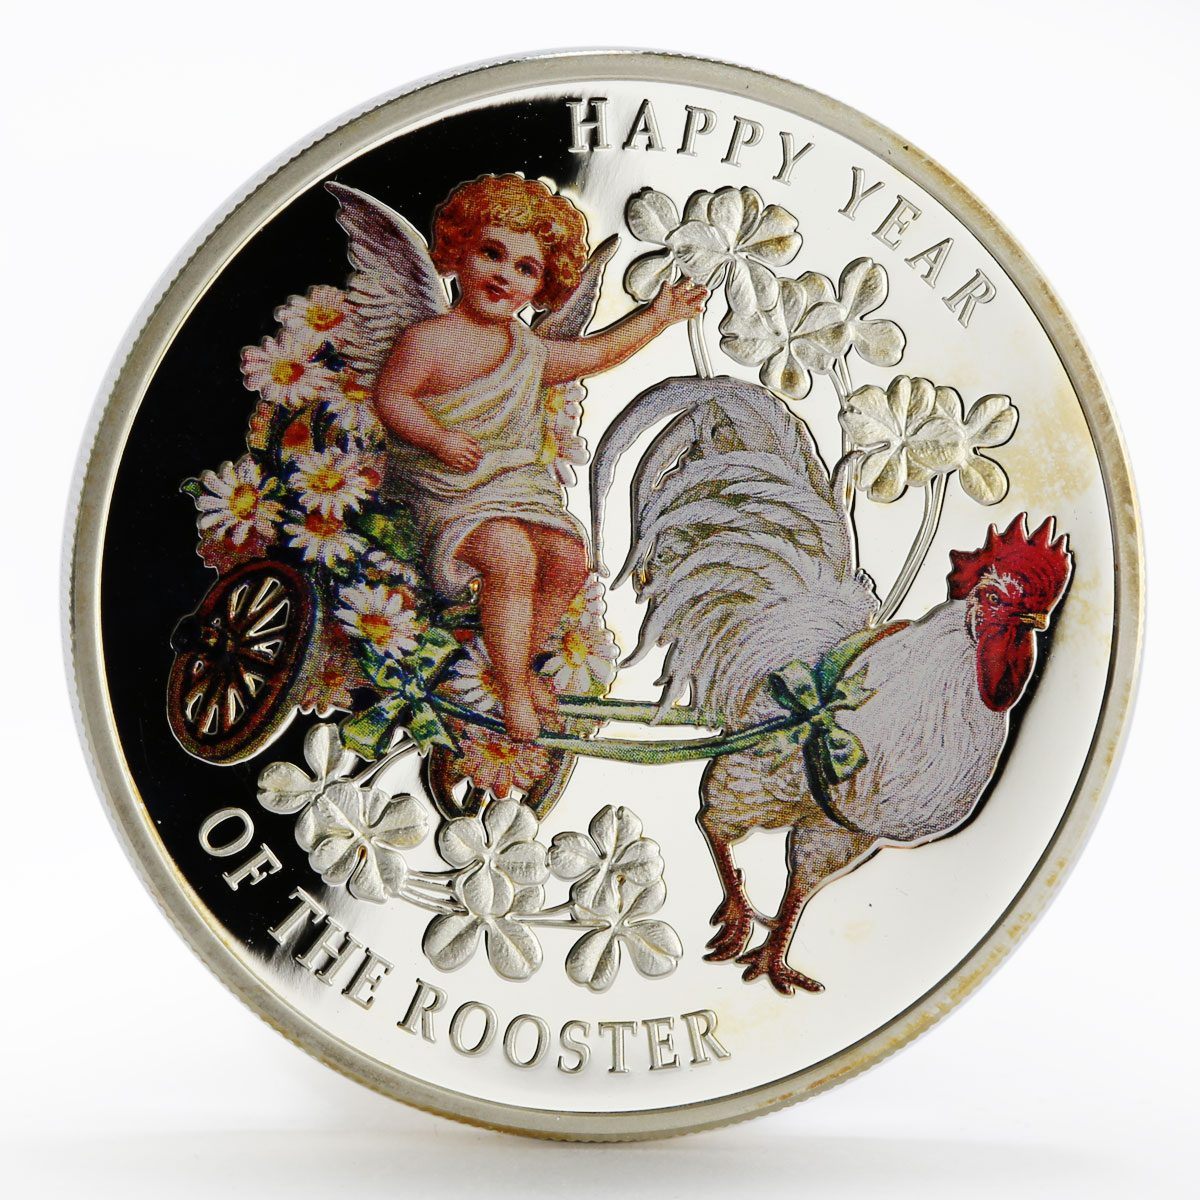 Macedonia 100 denars Year of the Rooster colored proof silver coin 2017